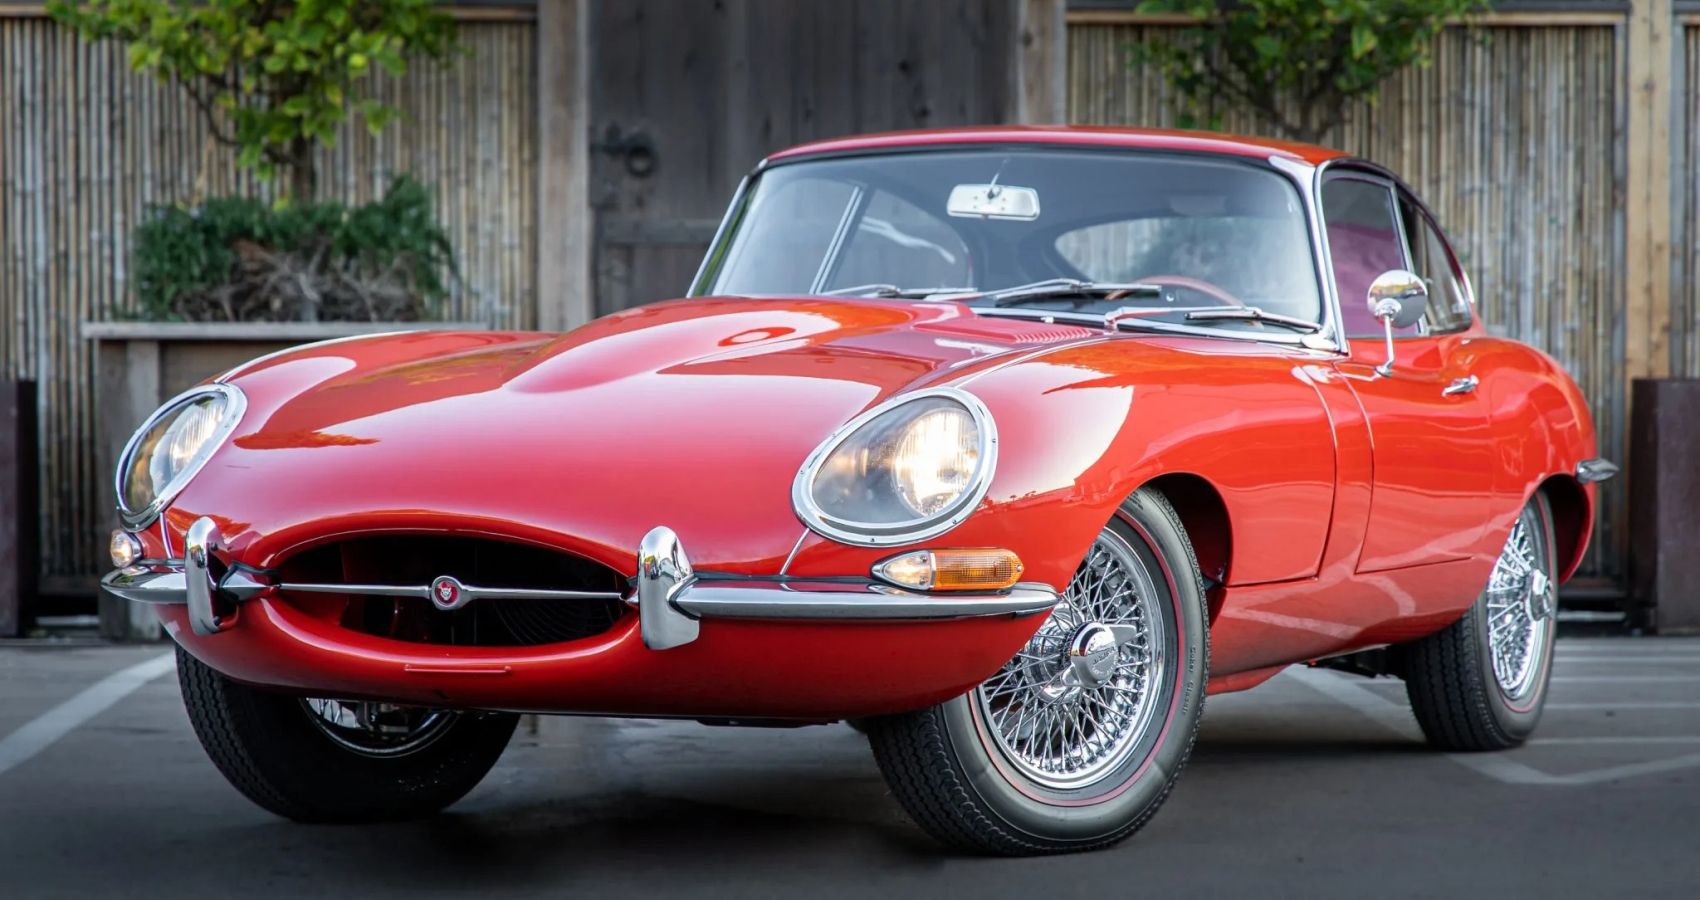 10 Cool Vintage Cars For Collectors And Enthusiasts